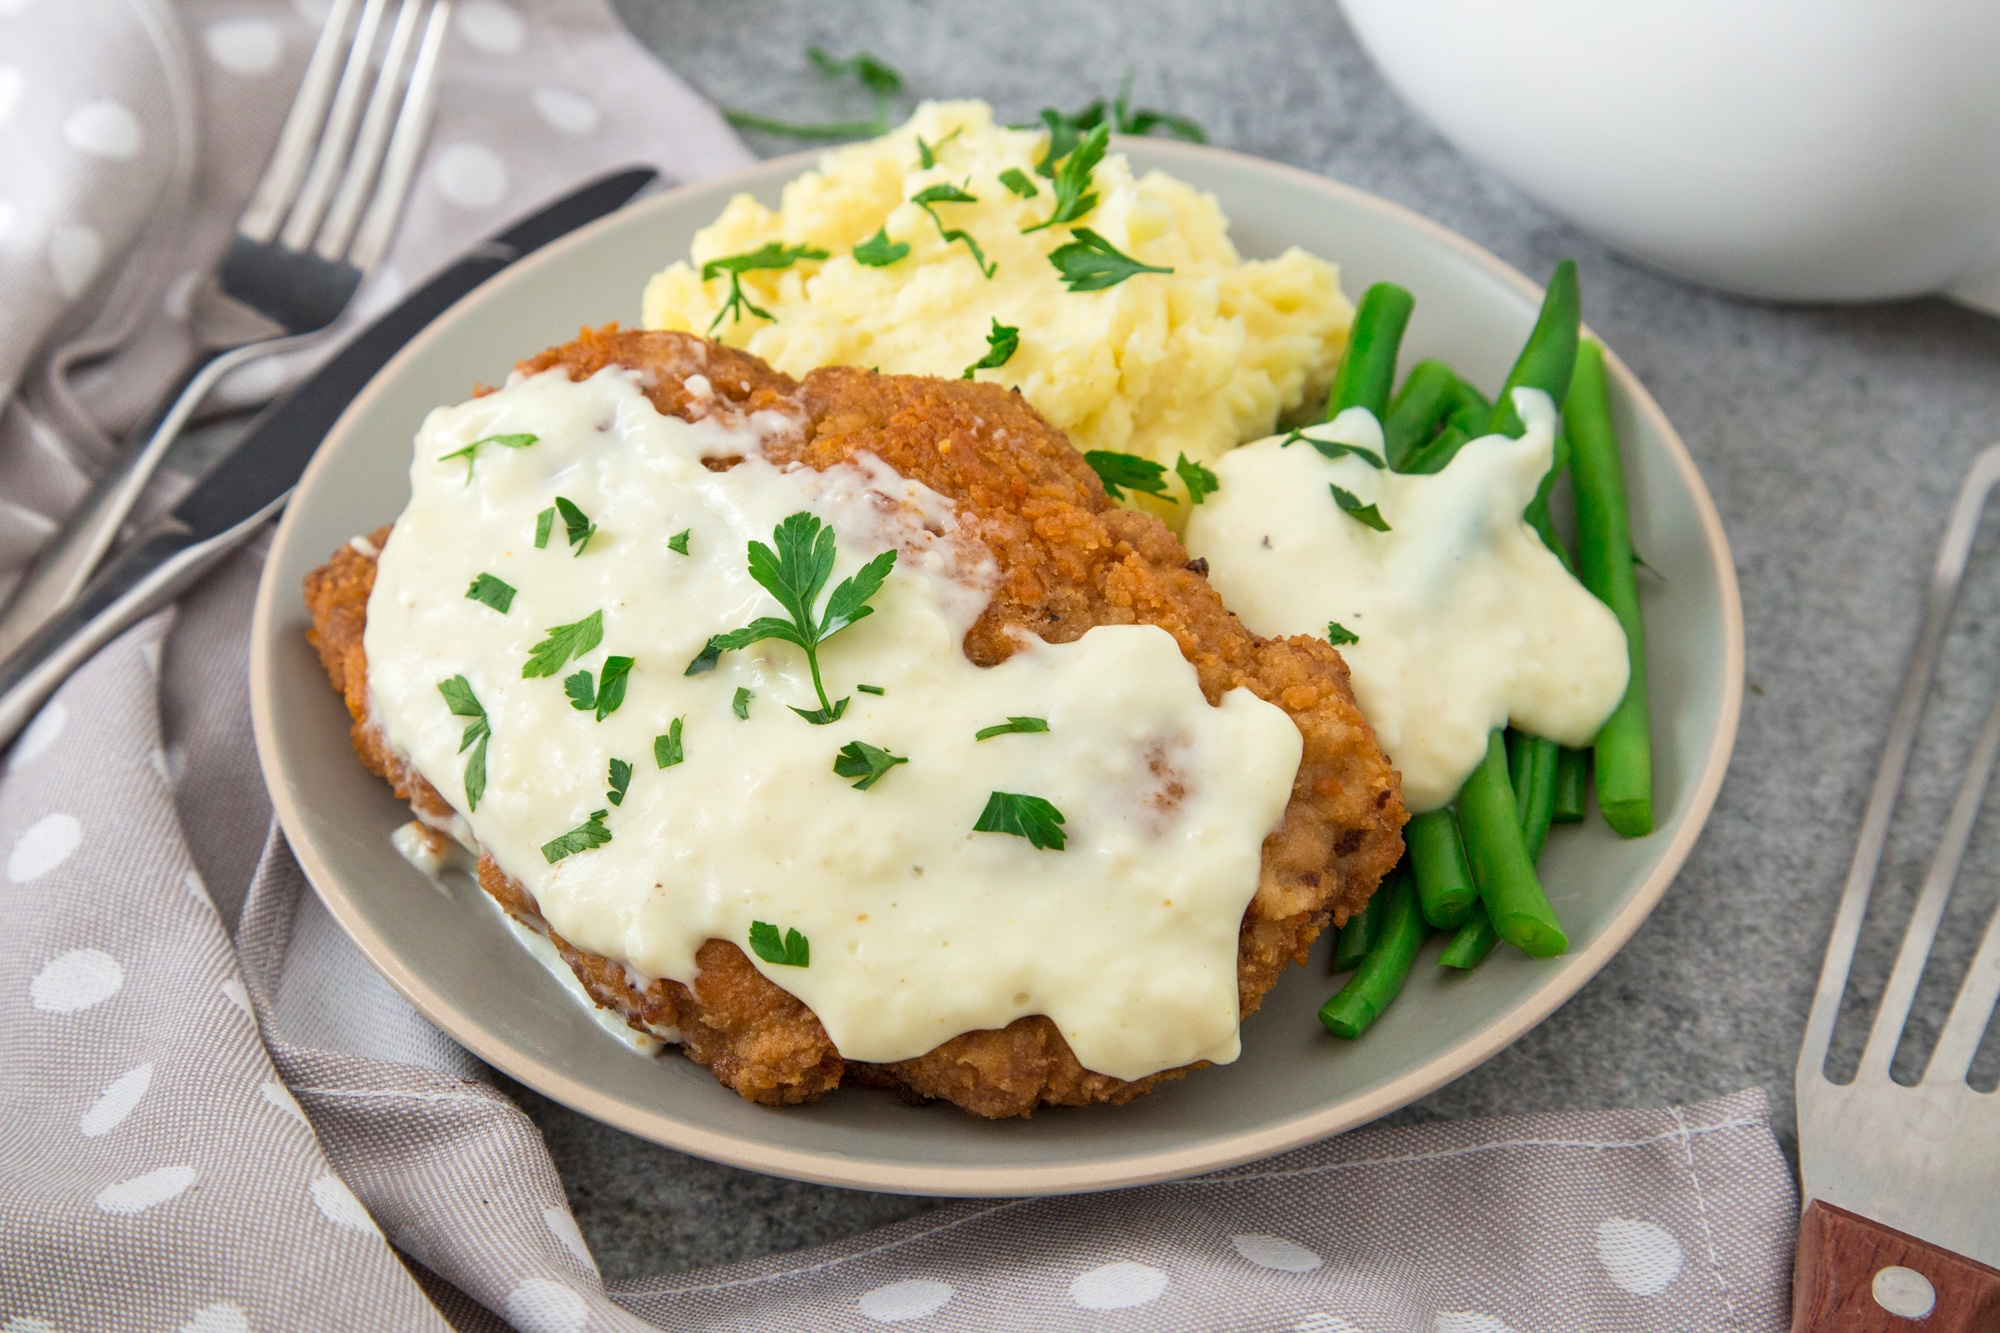 Chicken-Fried Steak with Creamy Gravy - The Local Palate